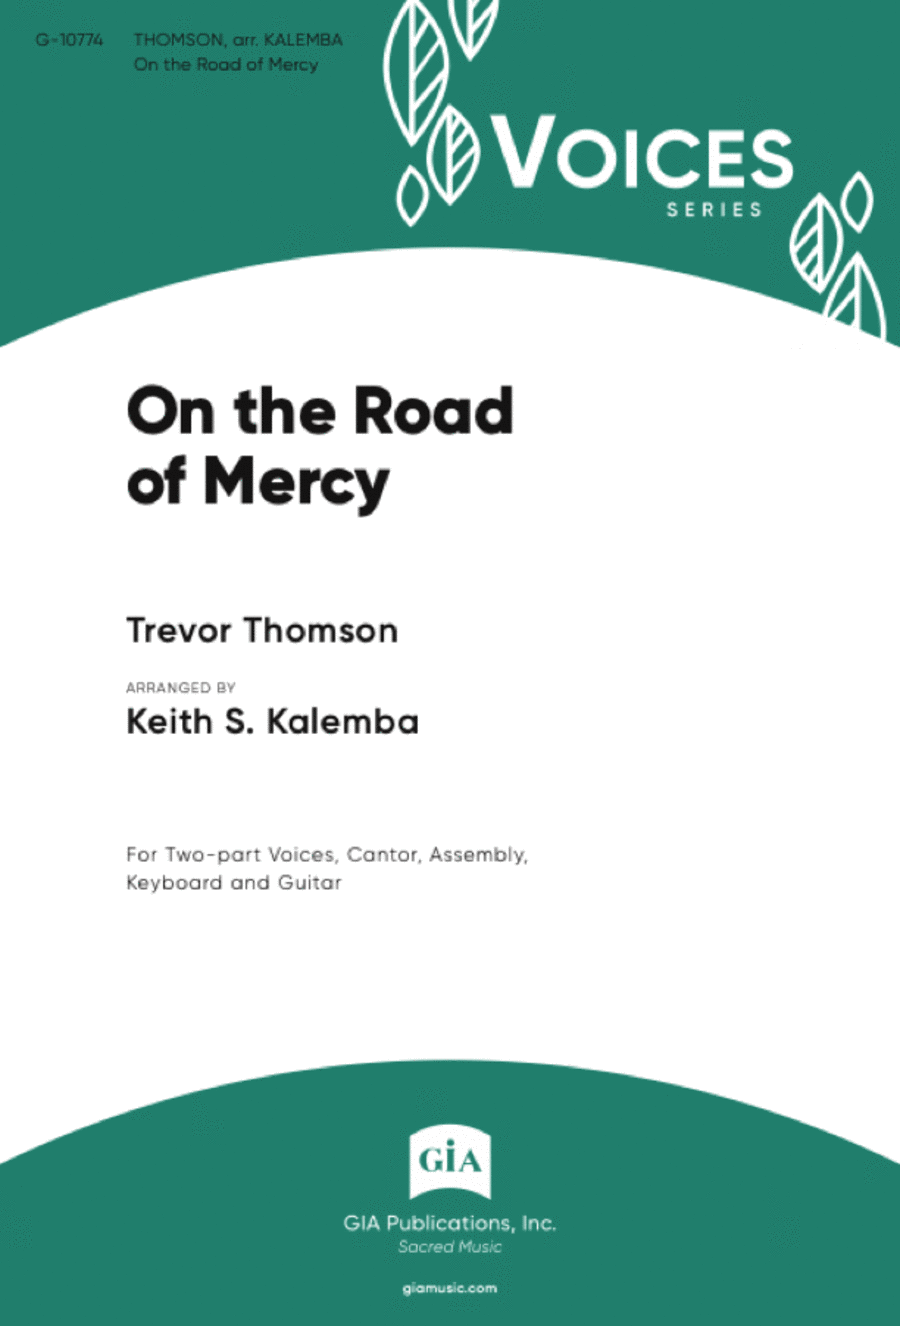 On the Road of Mercy